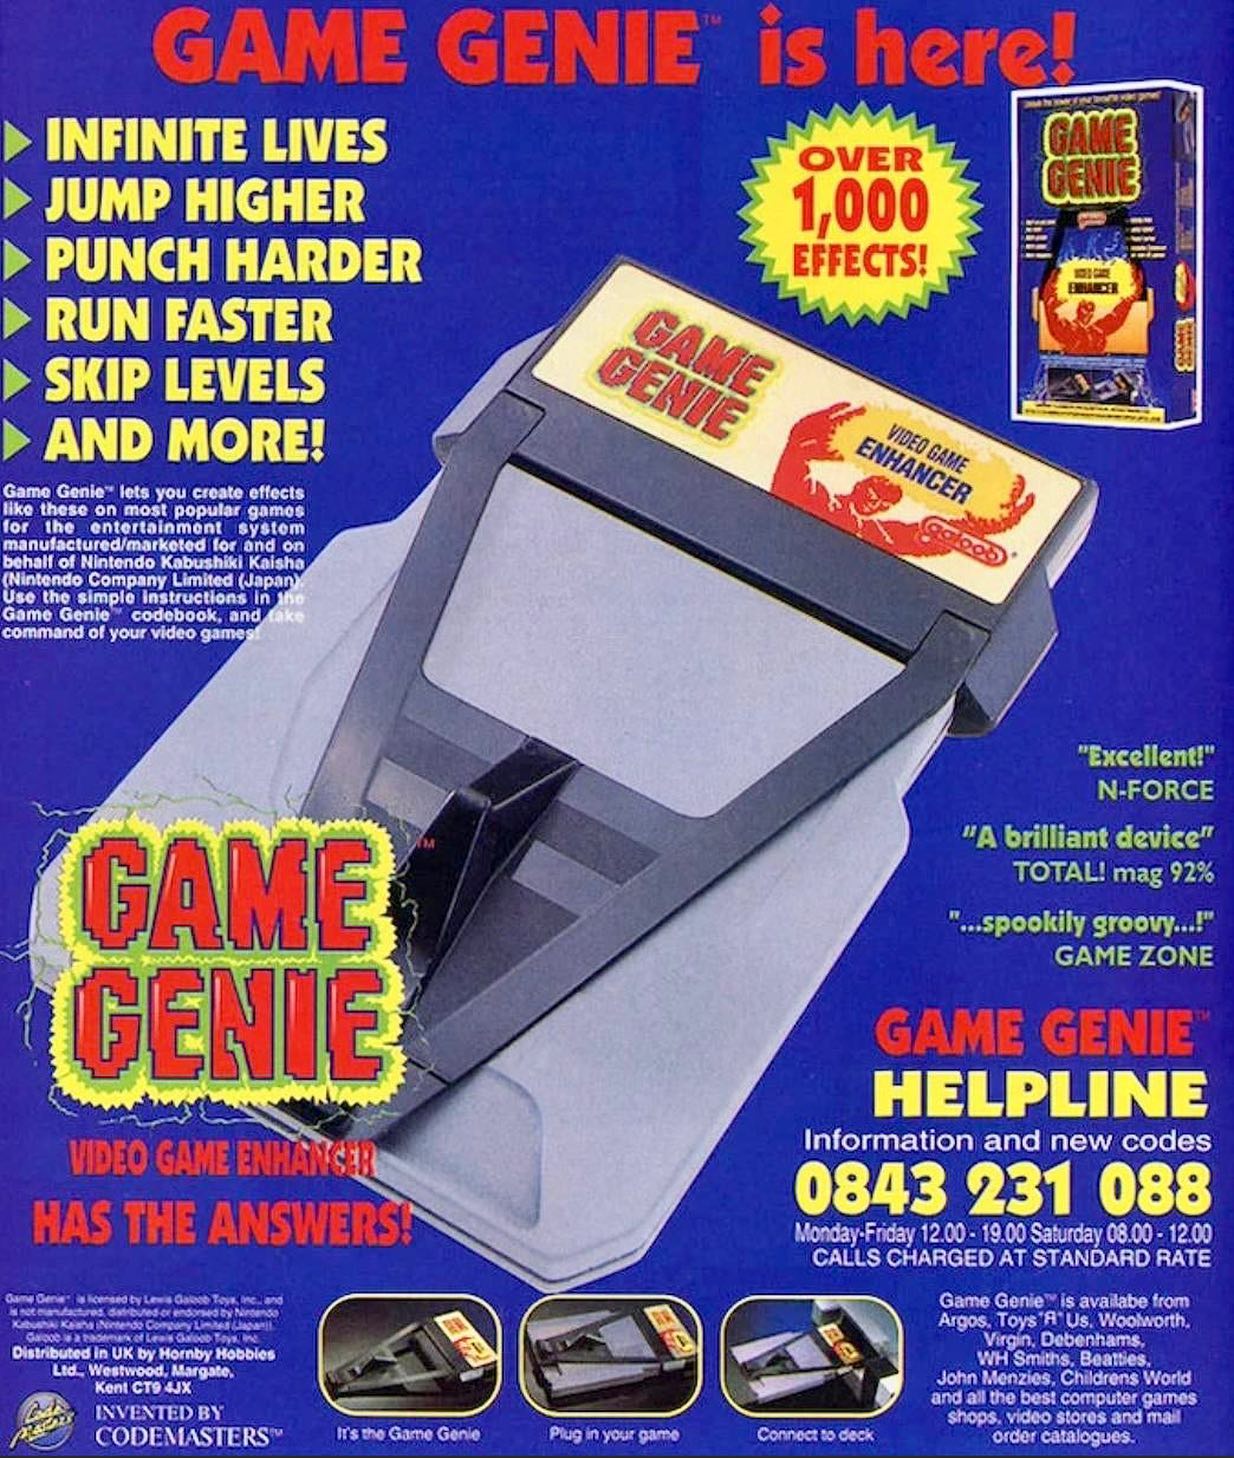 funny pics and randoms - game genie - Game Genie is here! Infinite Lives Jump Higher Punch Harder Run Faster Skip Levels And More! Game Genie lets you create effects these on most popular gamos for the entertainment system manufacturedmarketed for and on 